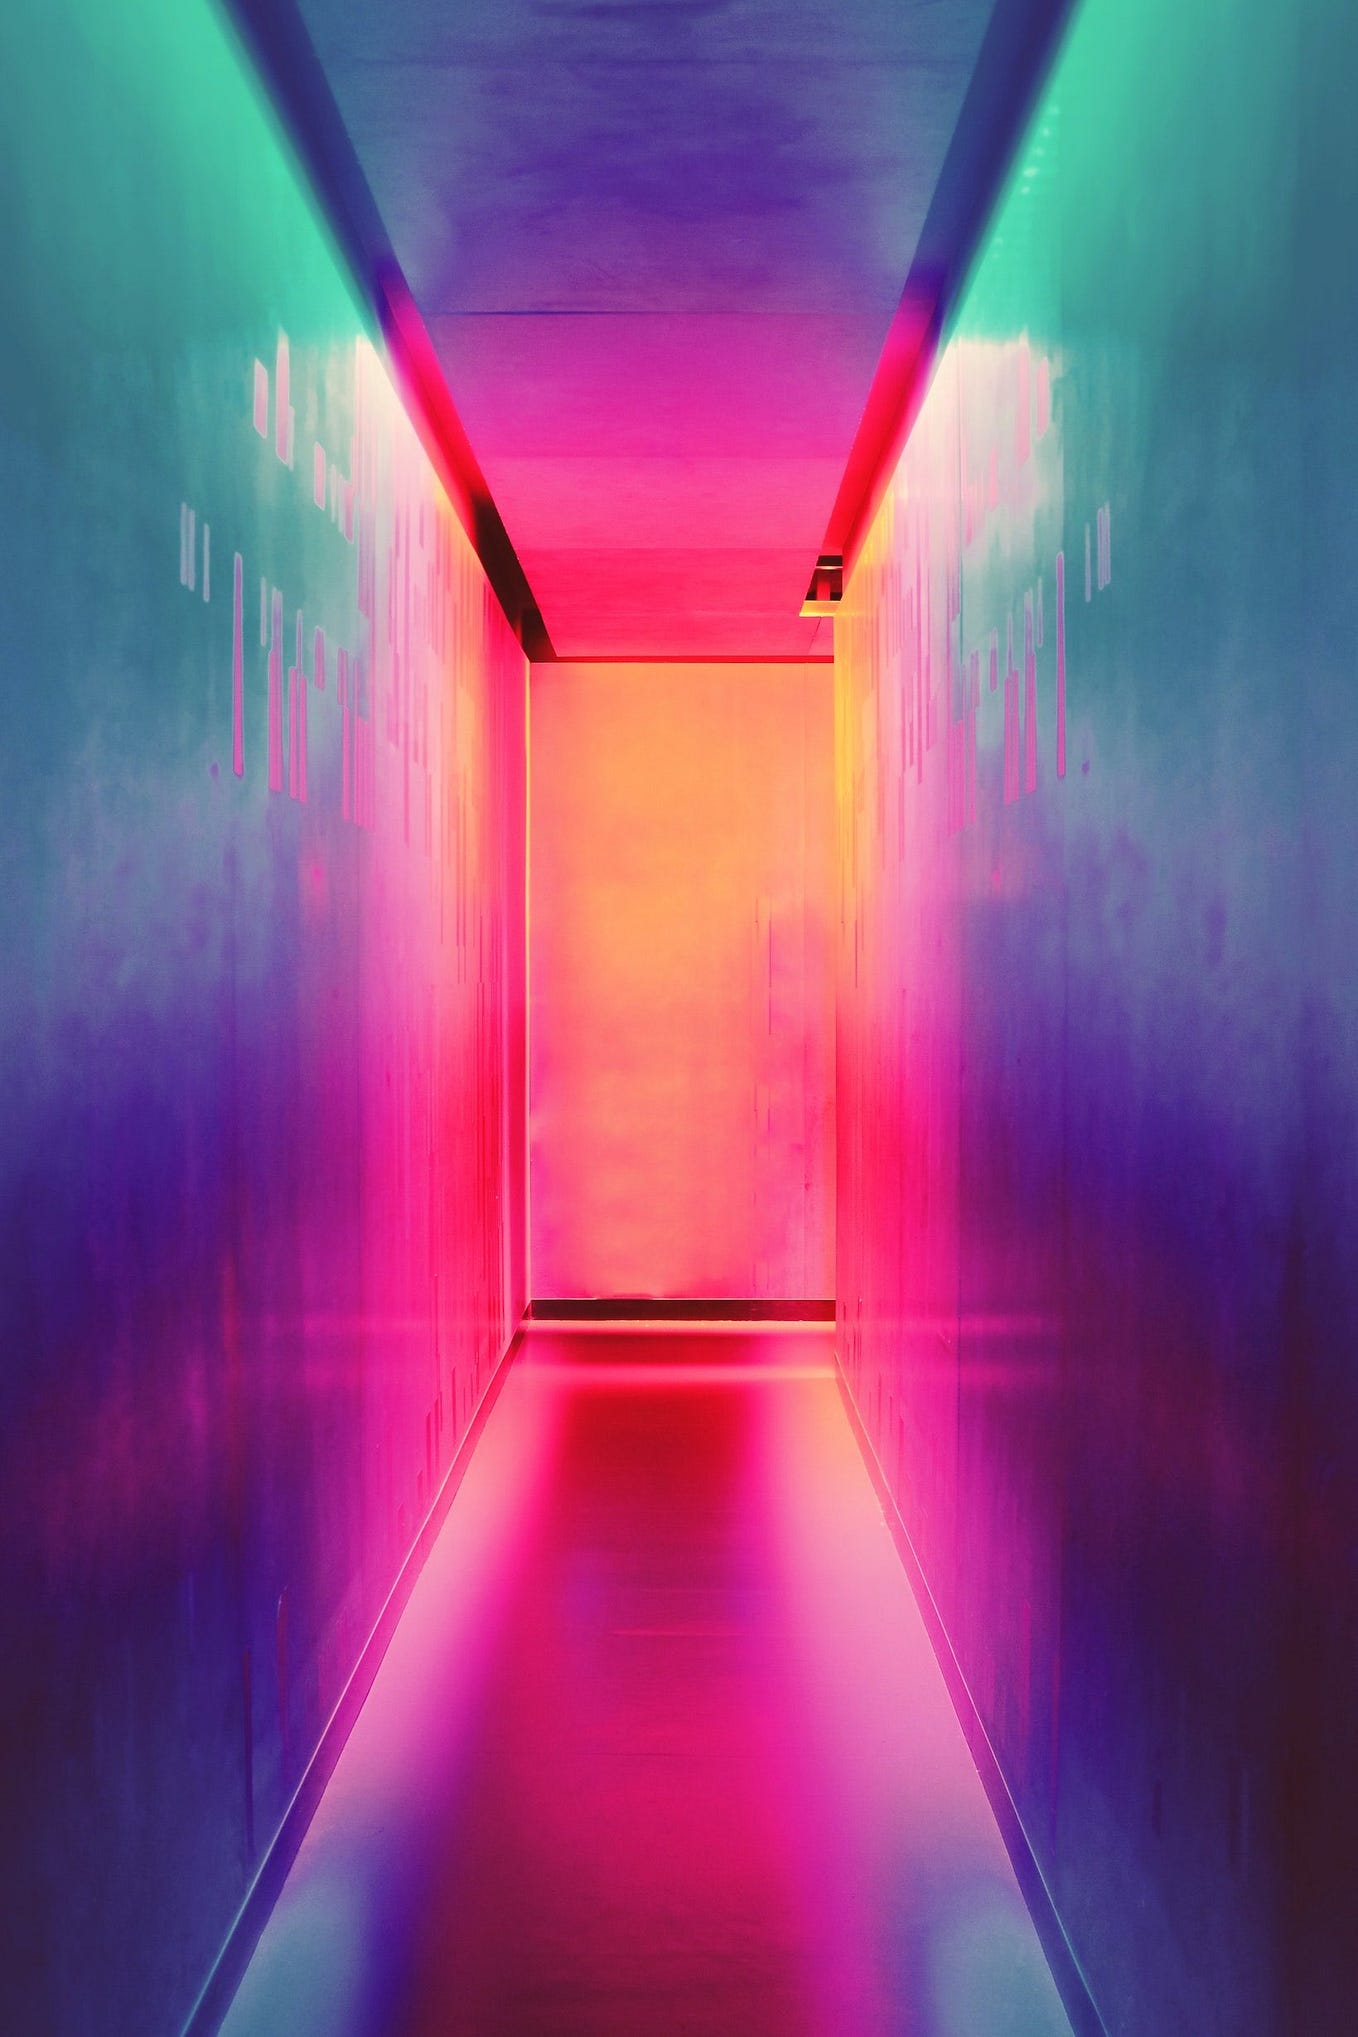 Long brightly colored corridor with an open door at the end.